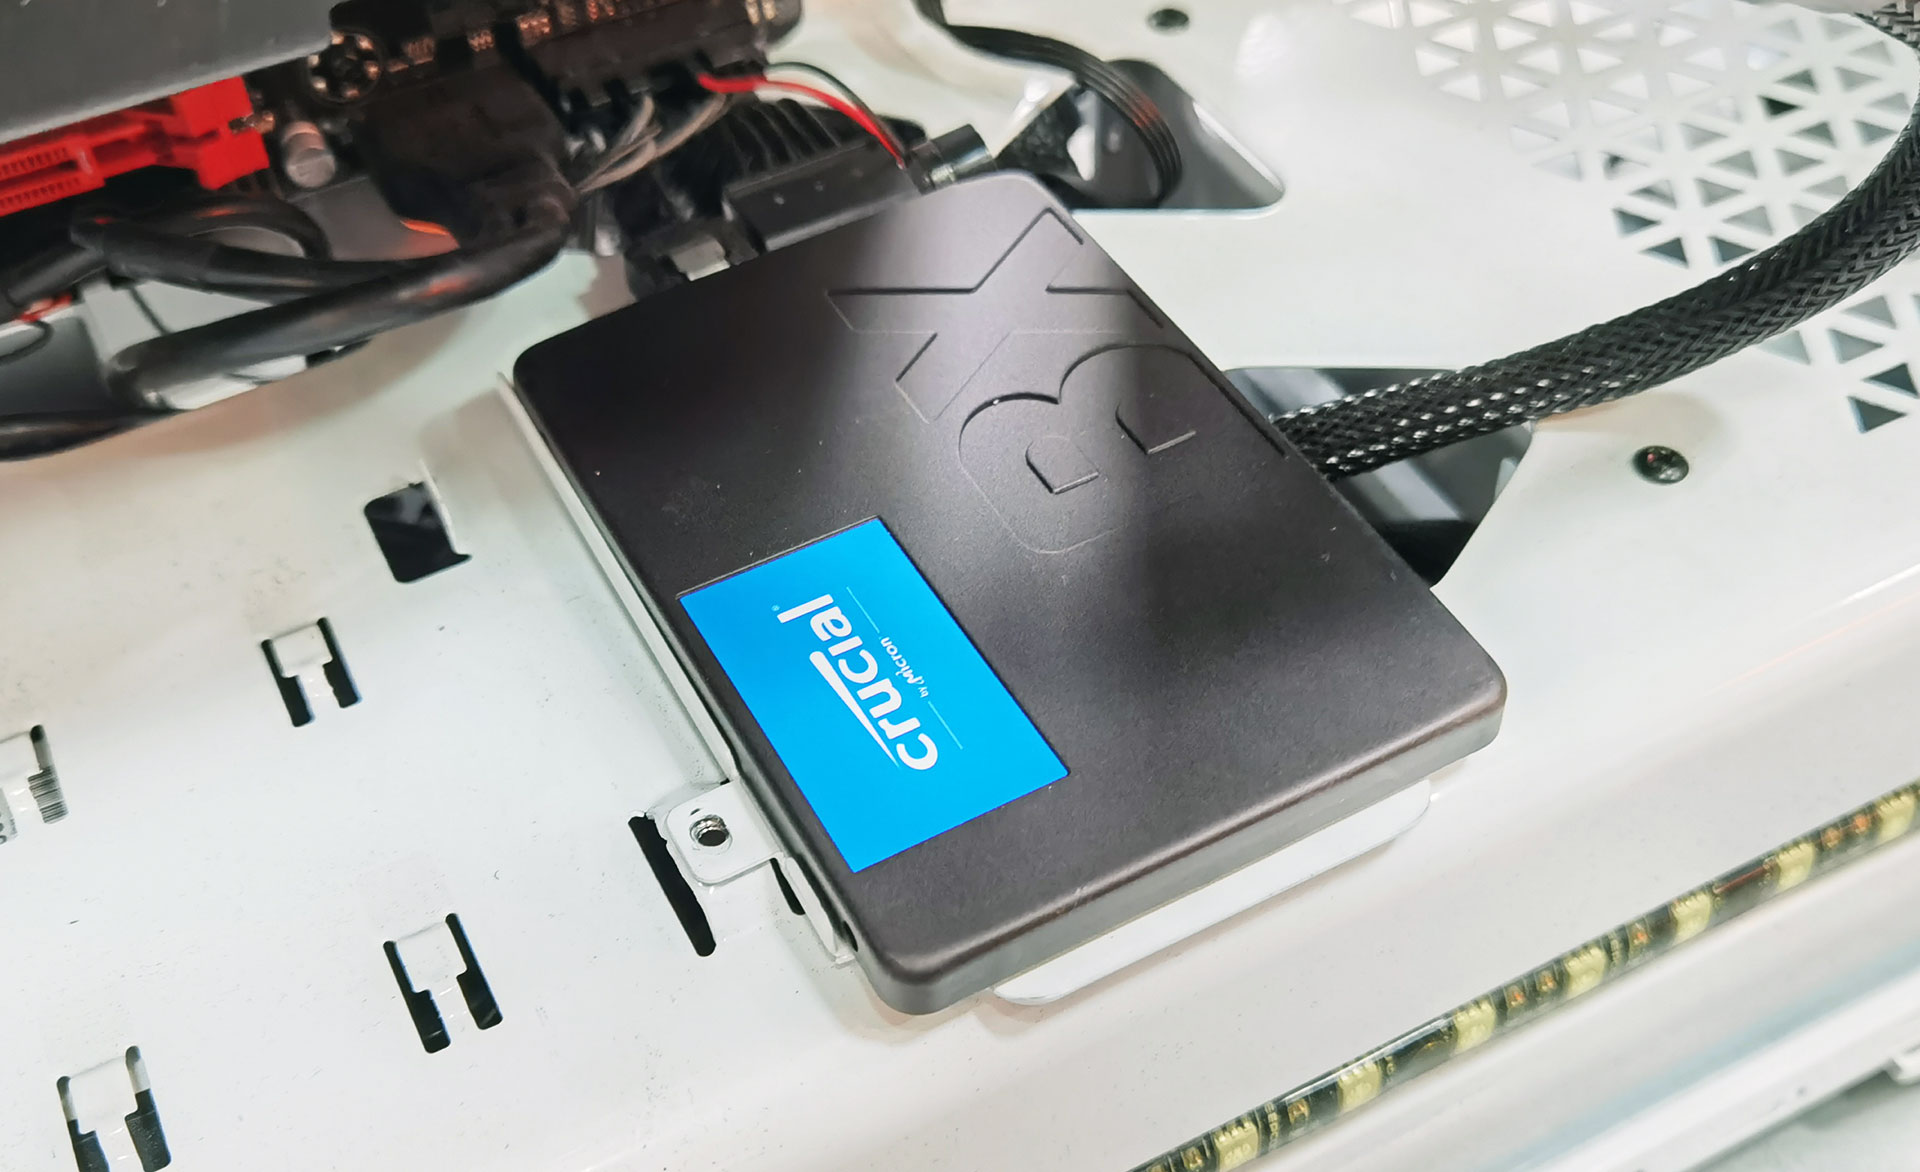 Fahrenheit ubrugt aIDS Crucial BX500 1TB Review: Low-Cost SSD as a Storage instead of HDD |  gagadget.com